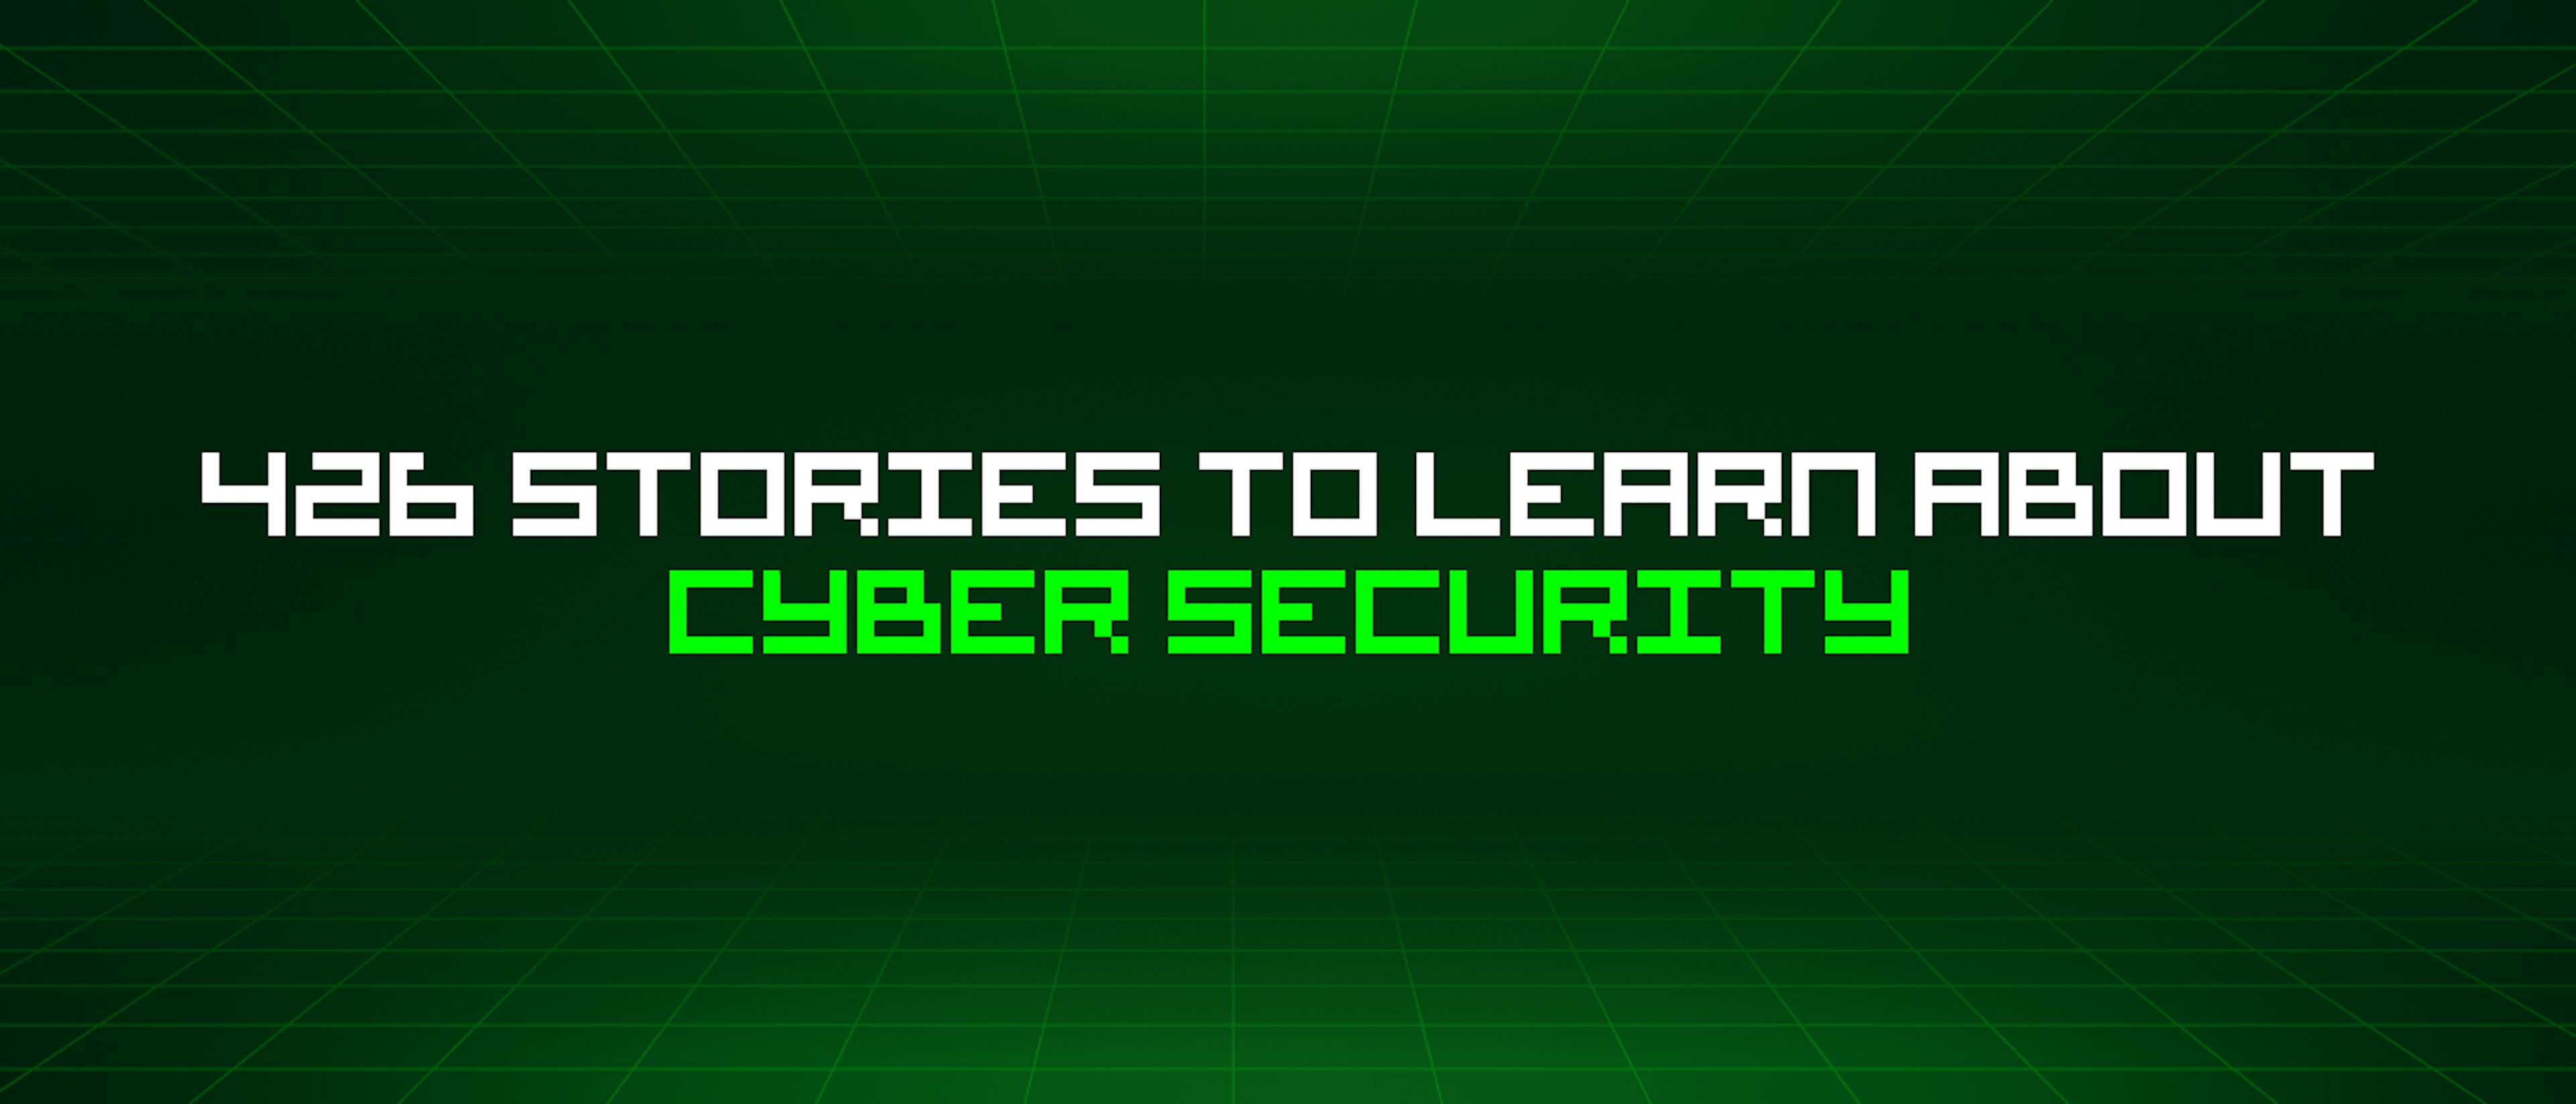 featured image - 426 Stories To Learn About Cyber Security